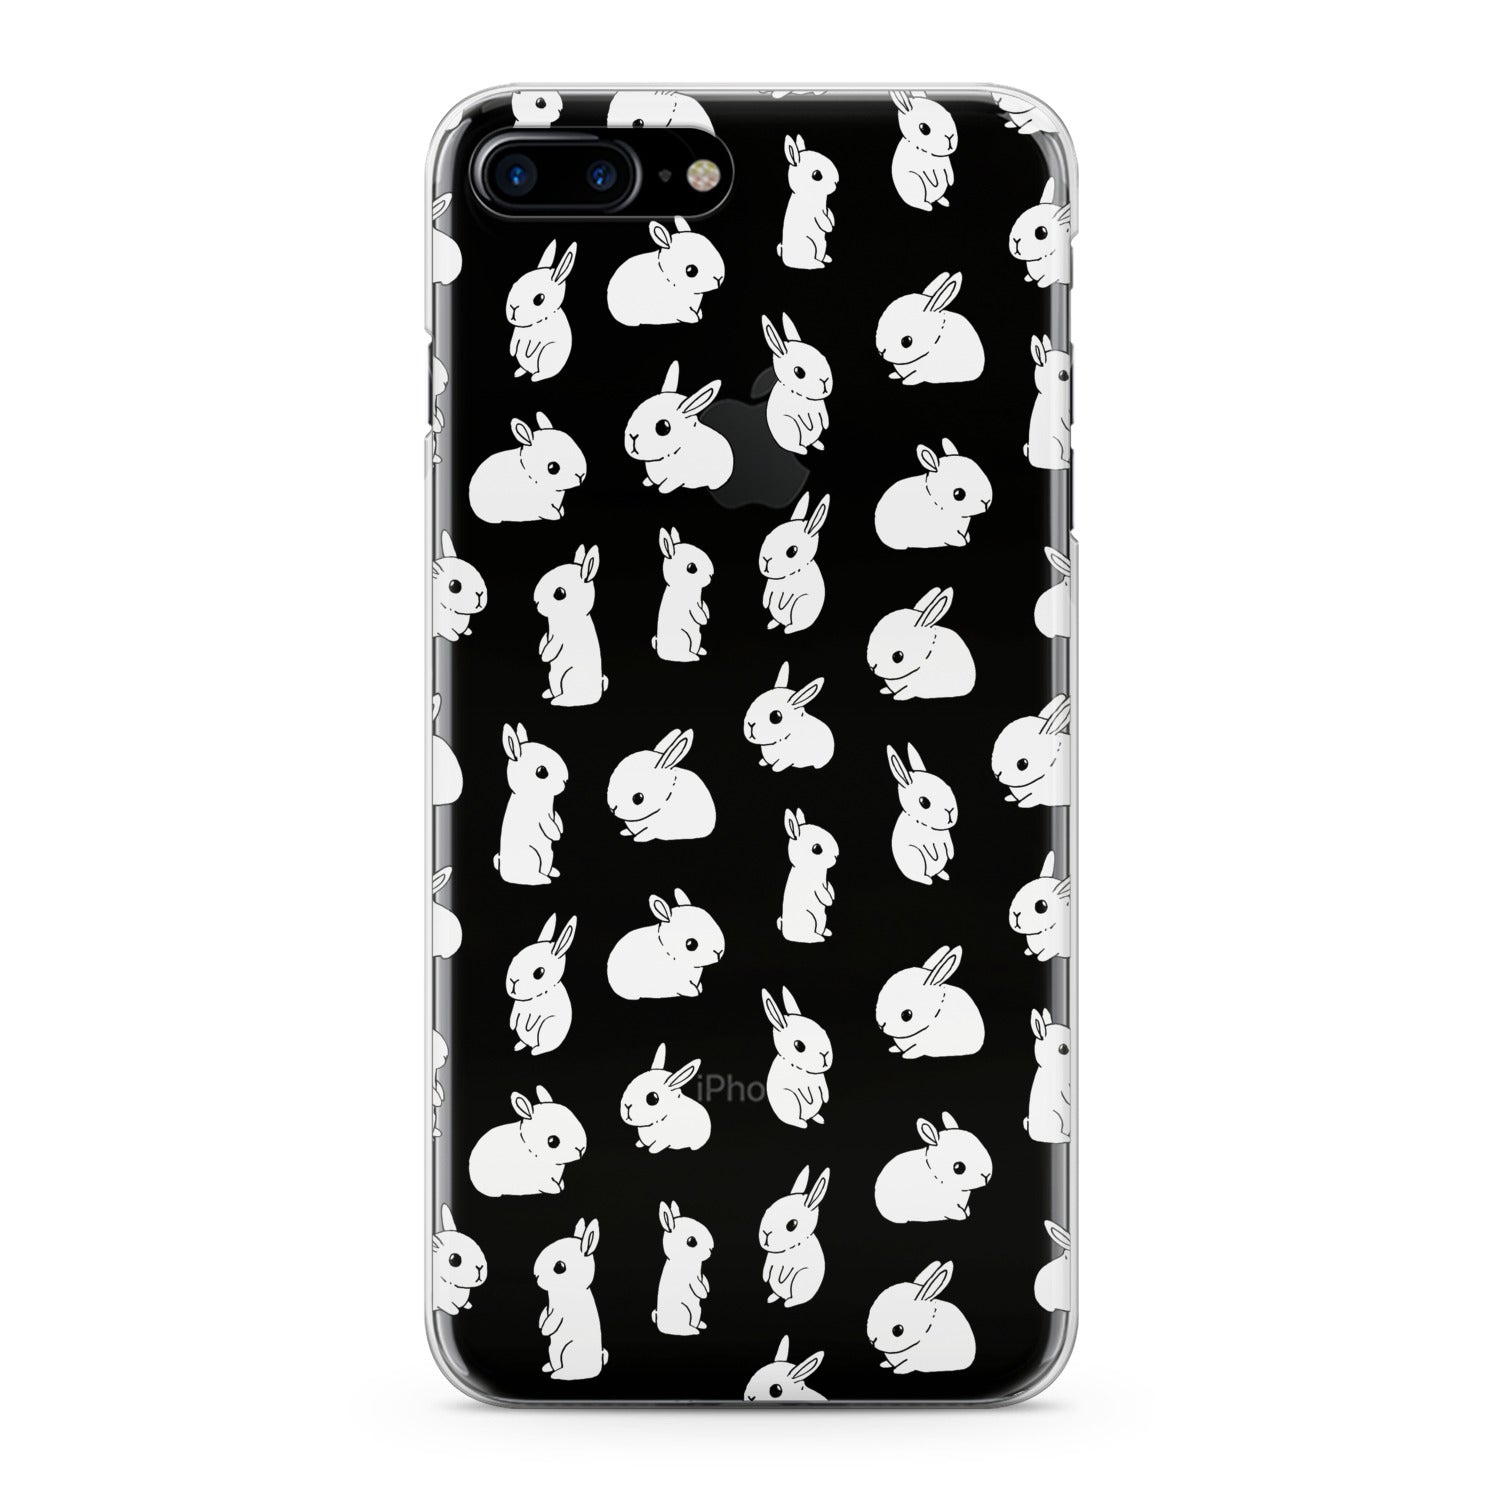 Lex Altern Cute White Bunnies Pattern Phone Case for your iPhone & Android phone.